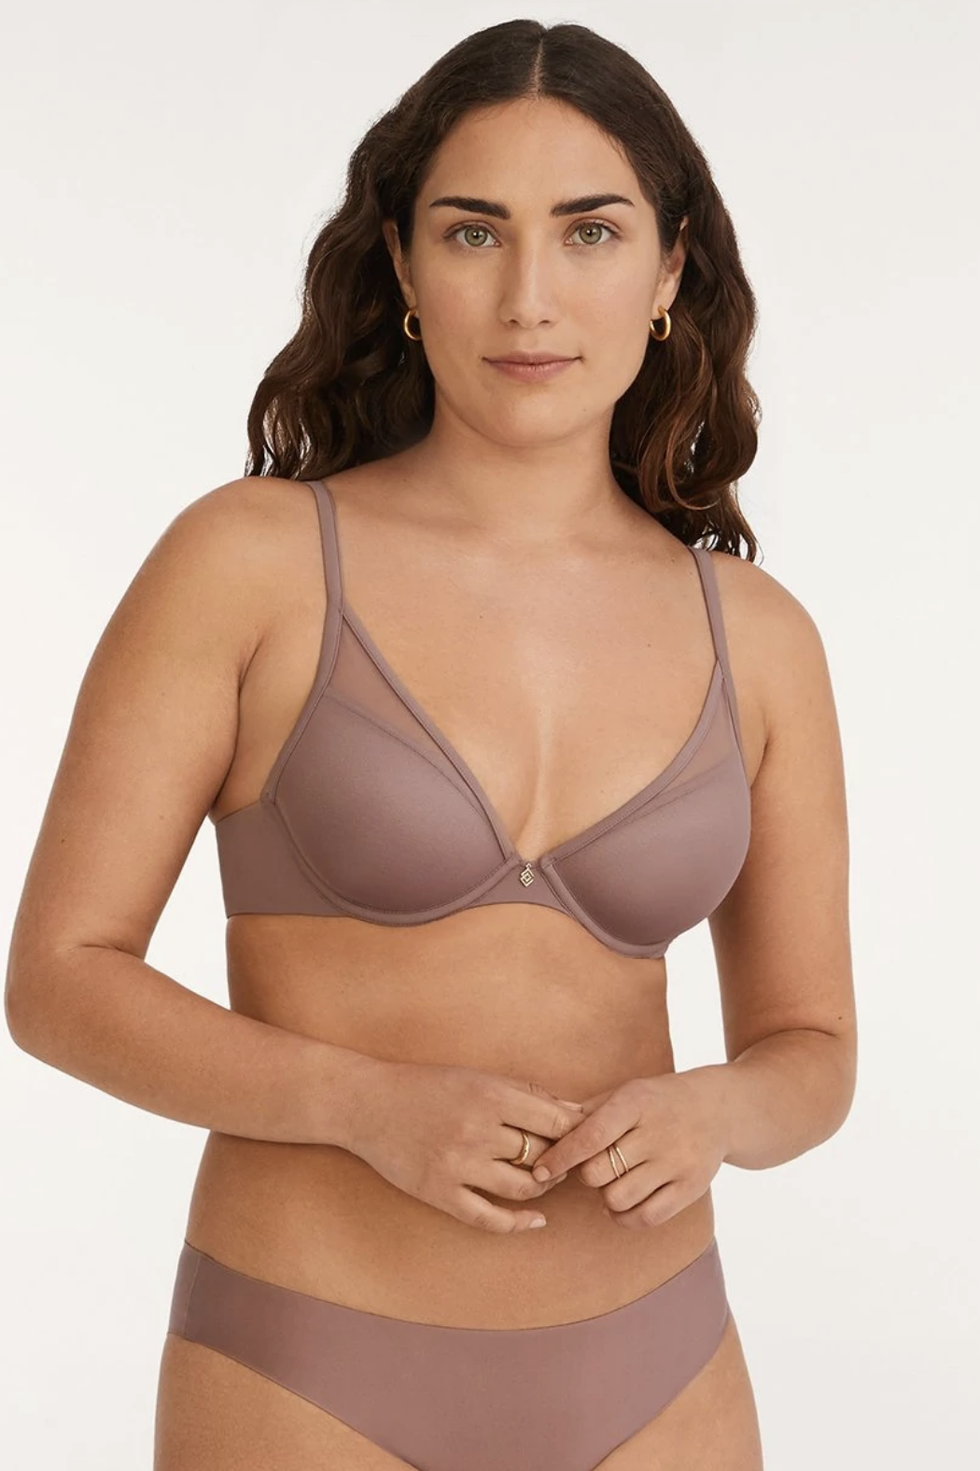 Average bra sizes rise from 34B to 36DD but experts split over whether  cause is obesity or fashion